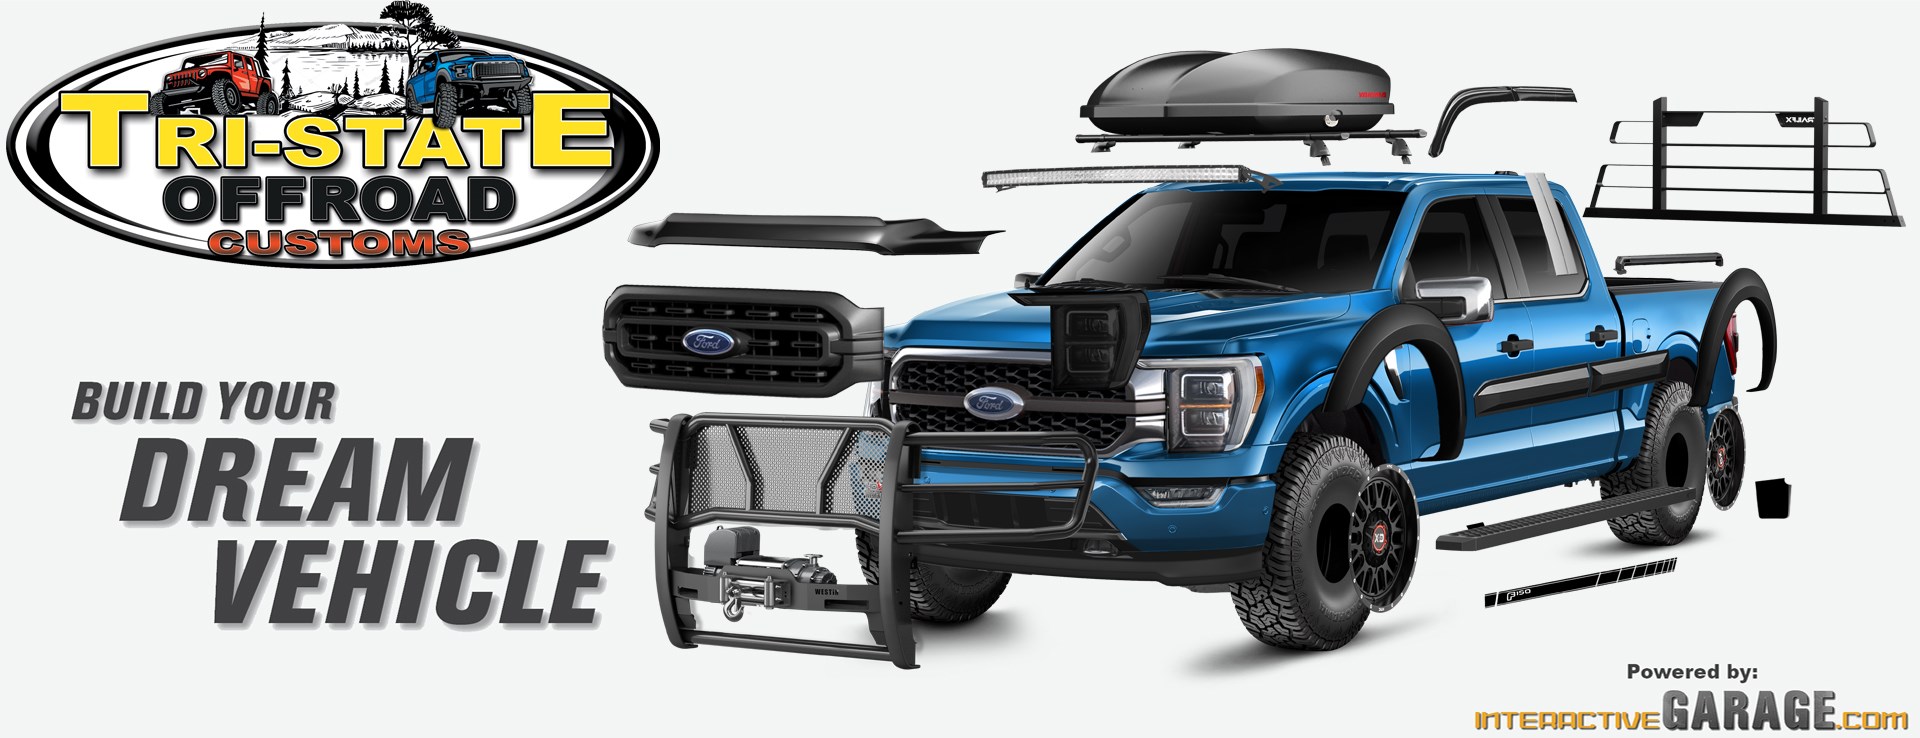 Build Your Own Ford Truck